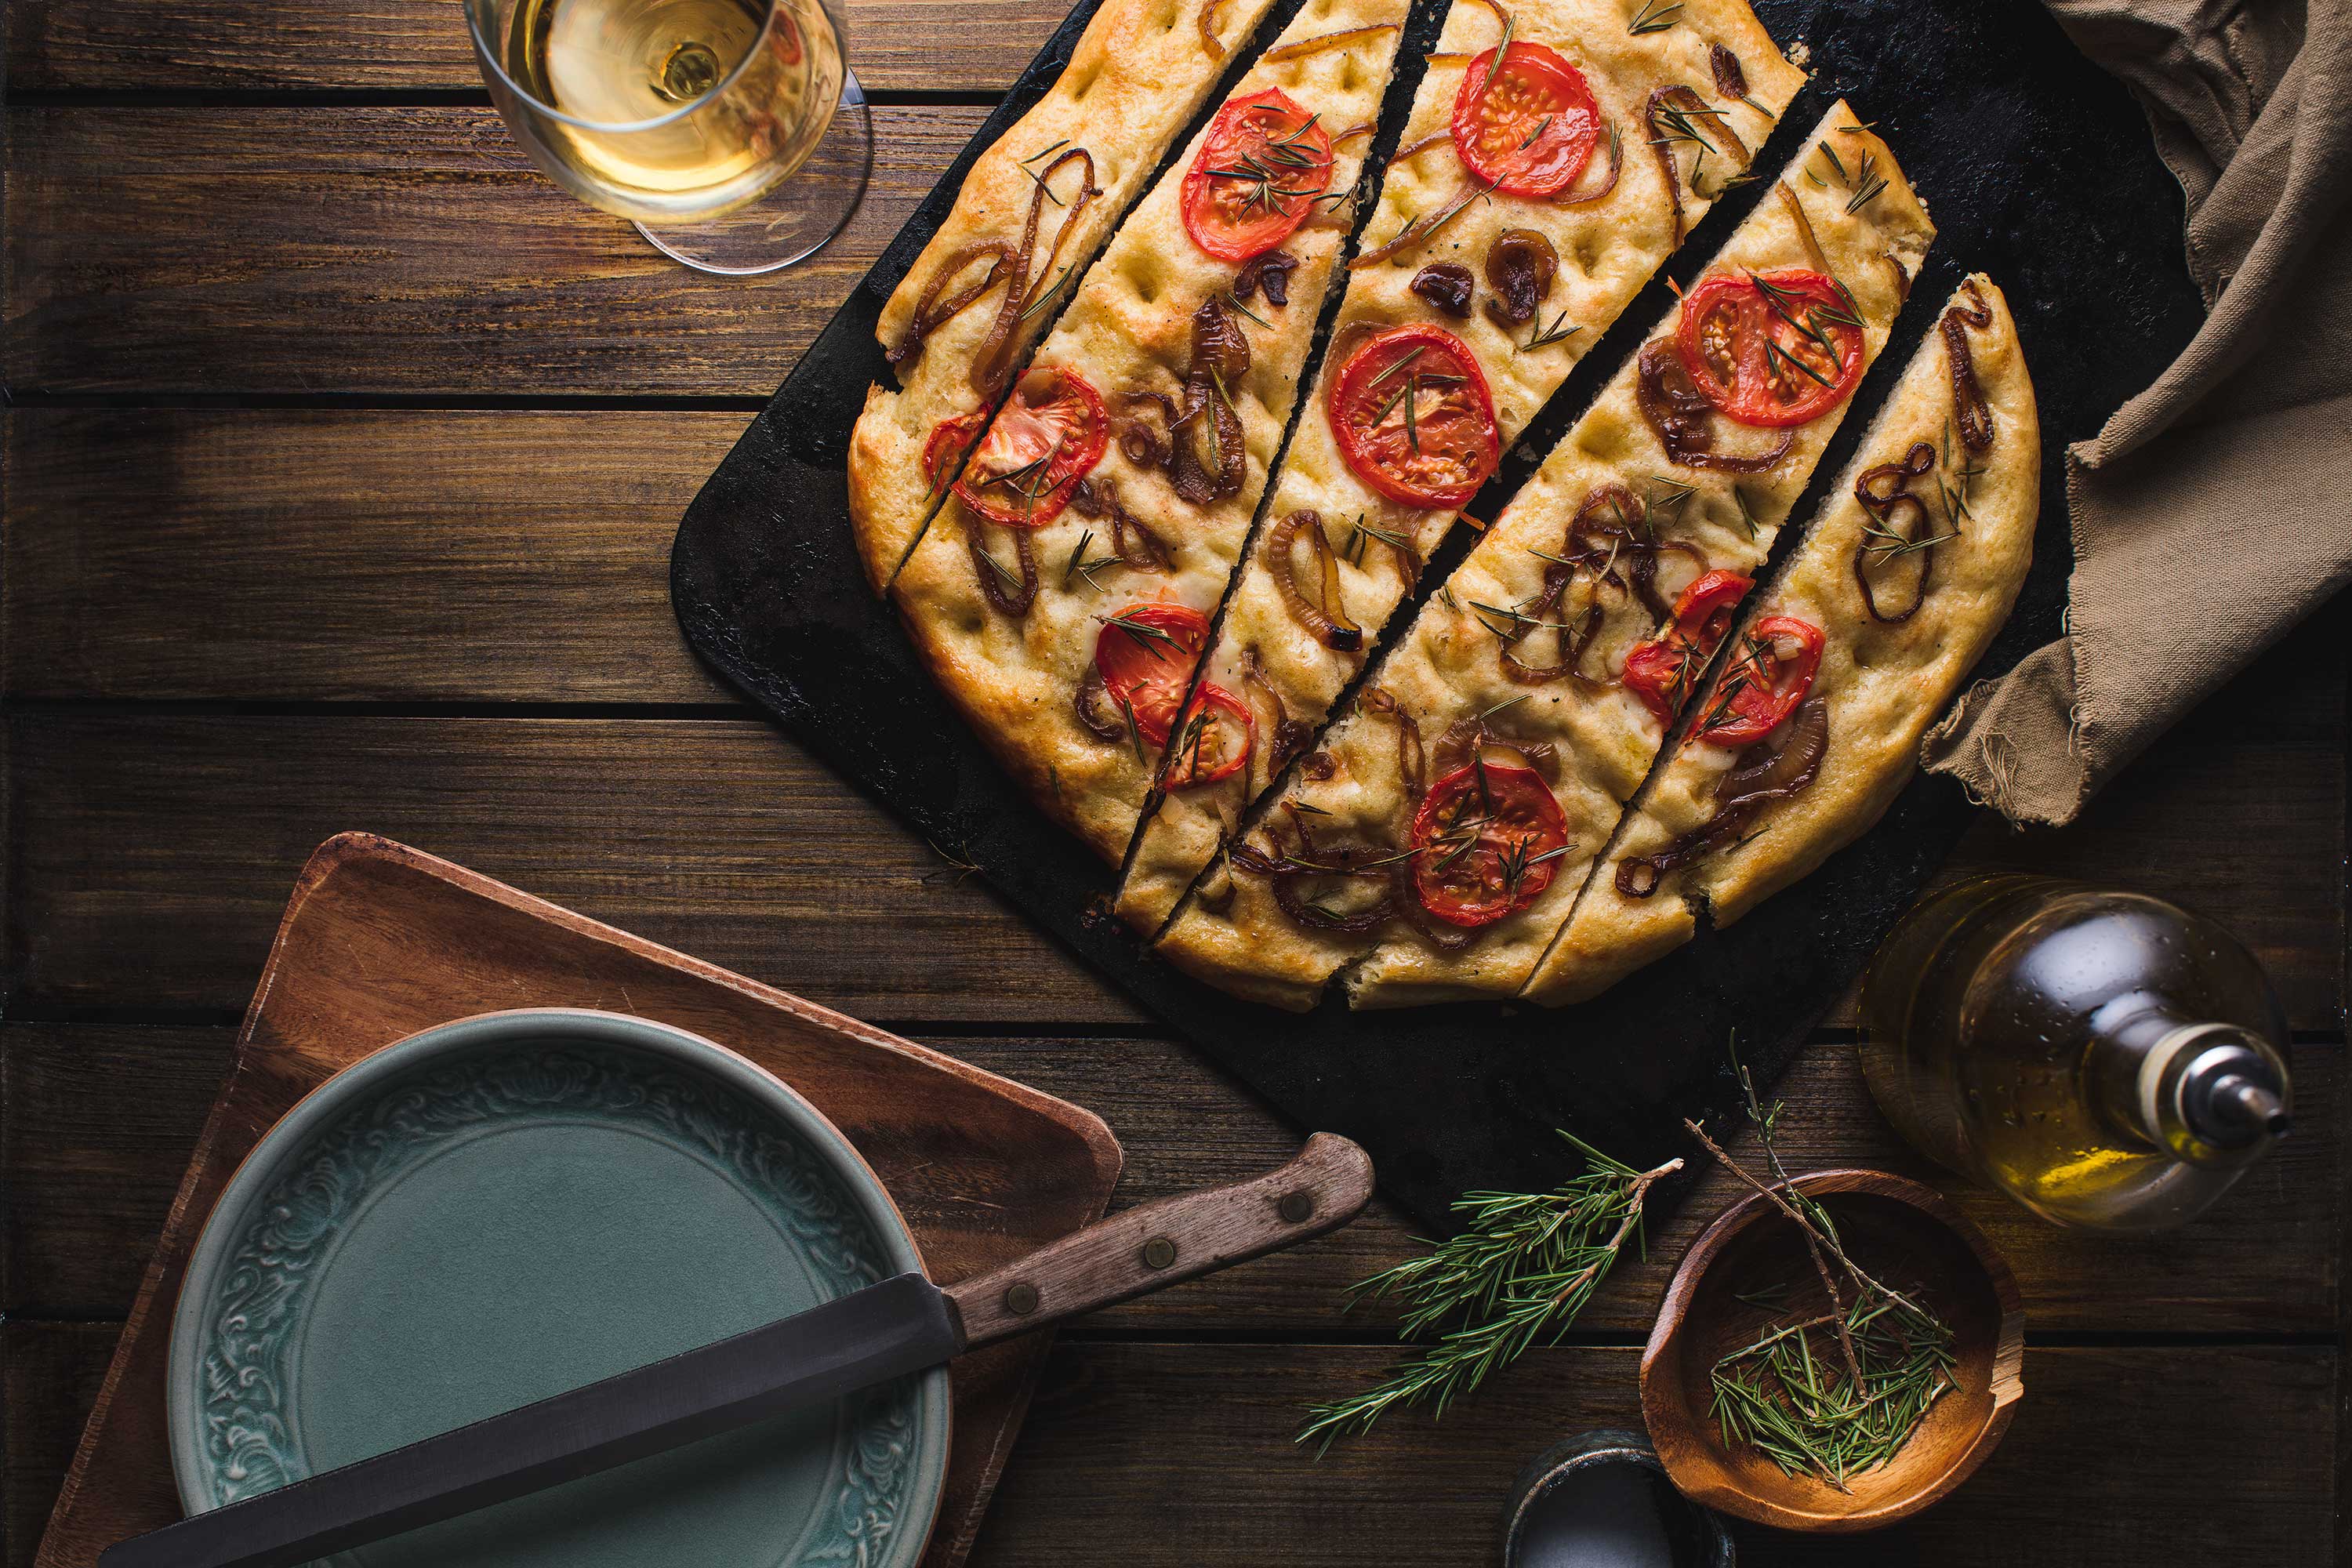 Focaccia Bread using Artificial food photography lighting